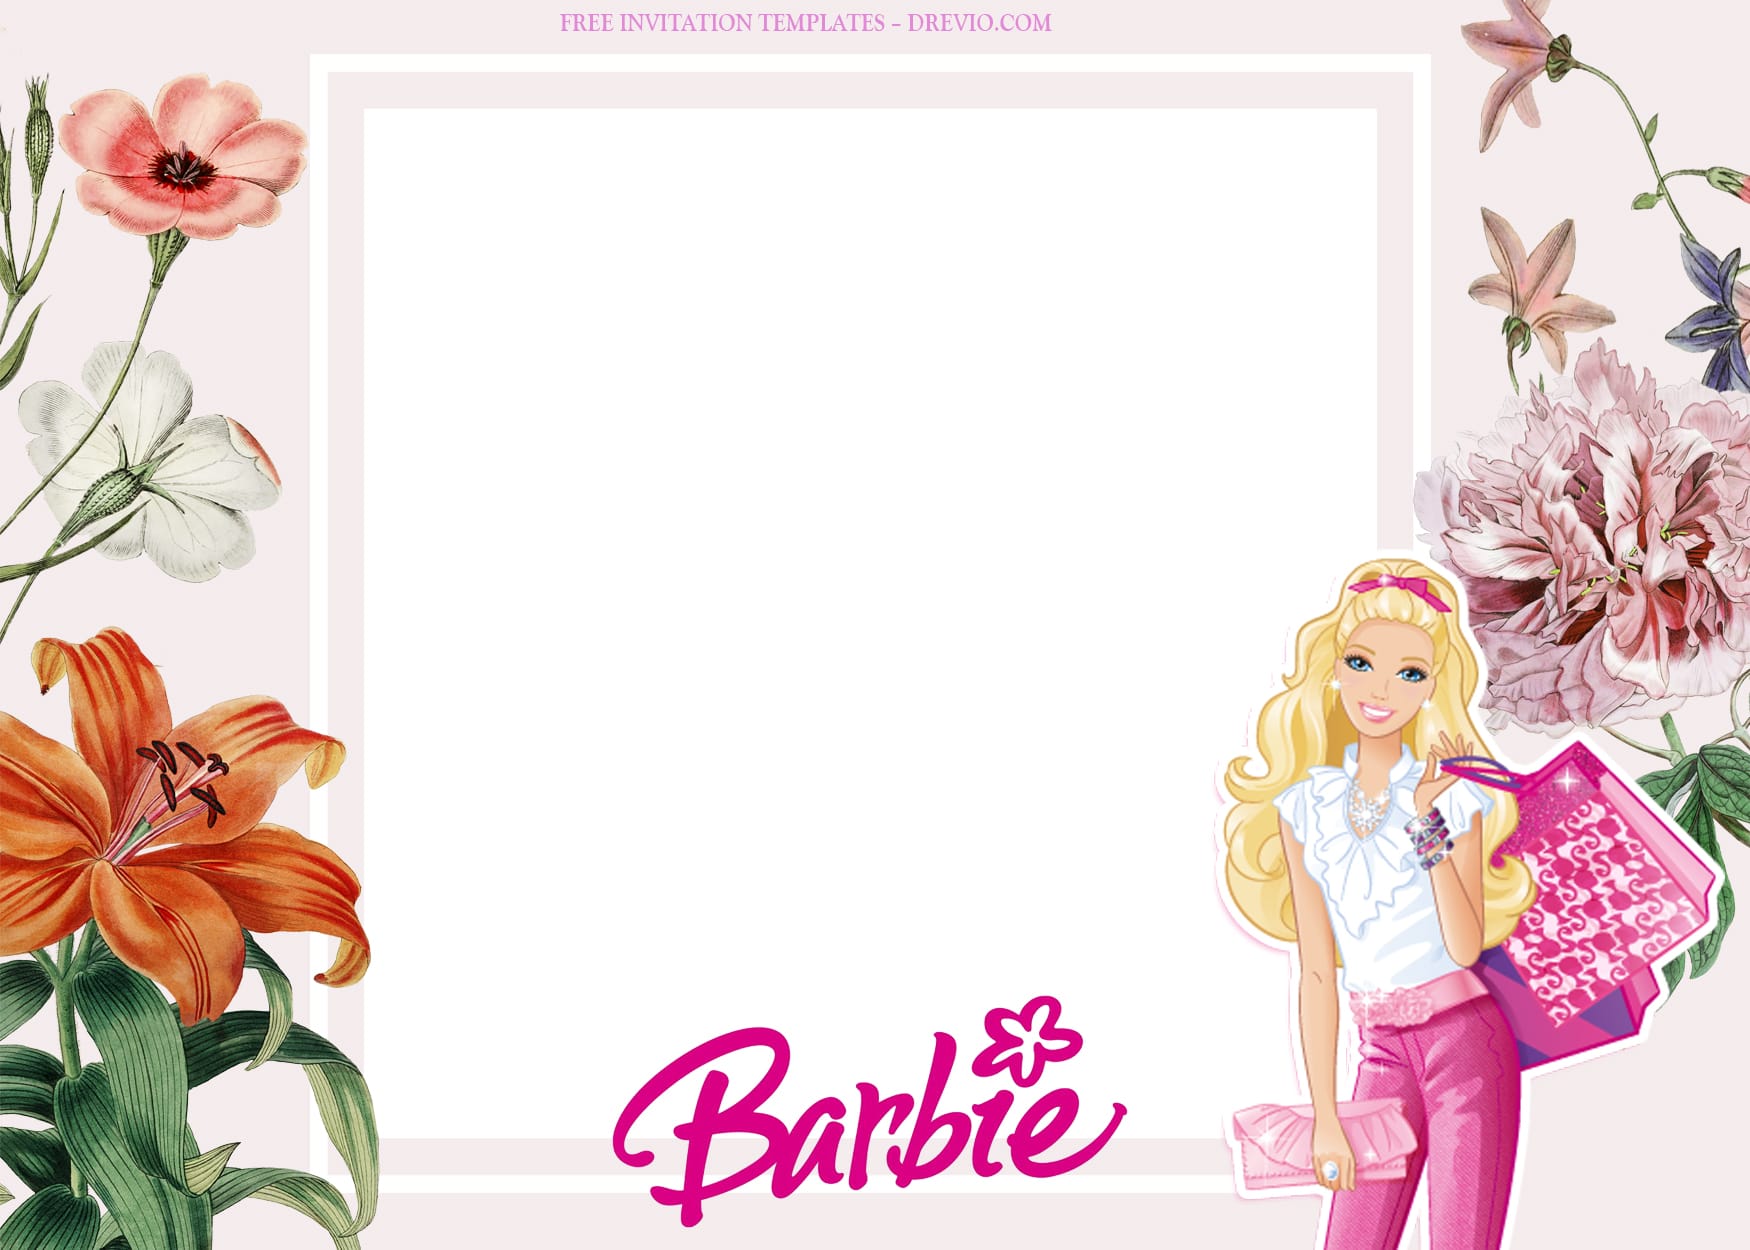 8+ A Good Day With Barbie Birthday Invitation Templates Type Seven